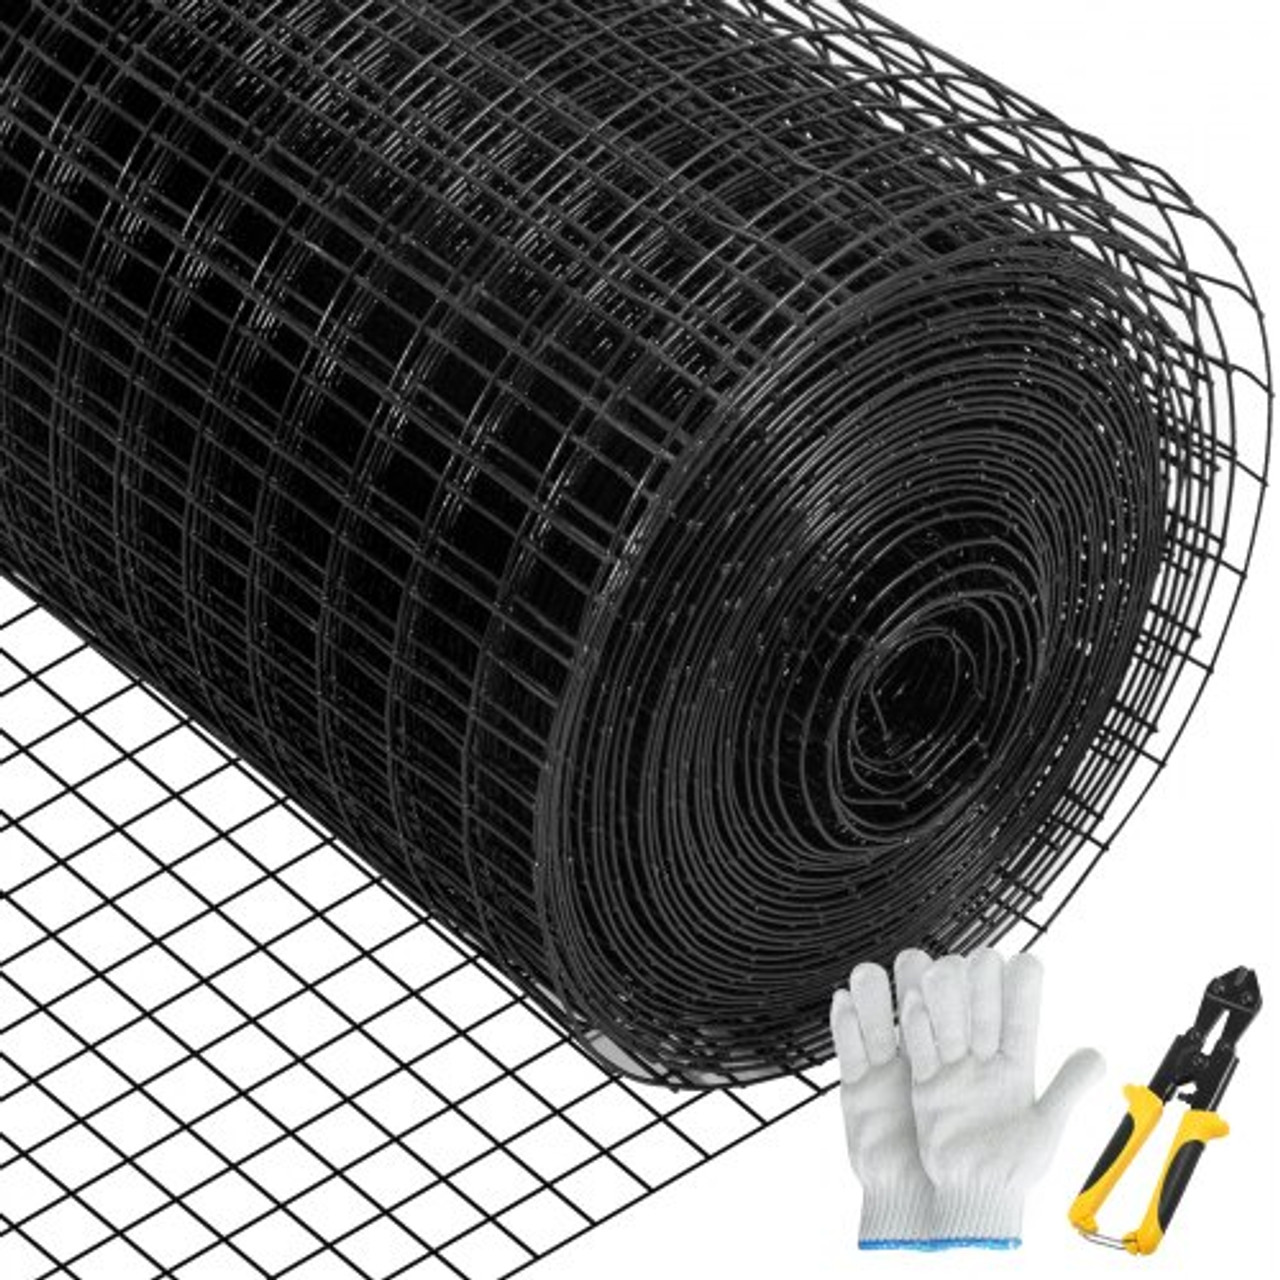 Hardware Cloth, 48" x 50' & 1"x1" Mesh Size, Galvanized Steel Vinyl Coated 16 Gauge Chicken Wire Fencing w/A Cutting Plier & A Pair of Fabric Gloves, for Garden Fencing & Pet Enclosures, Black